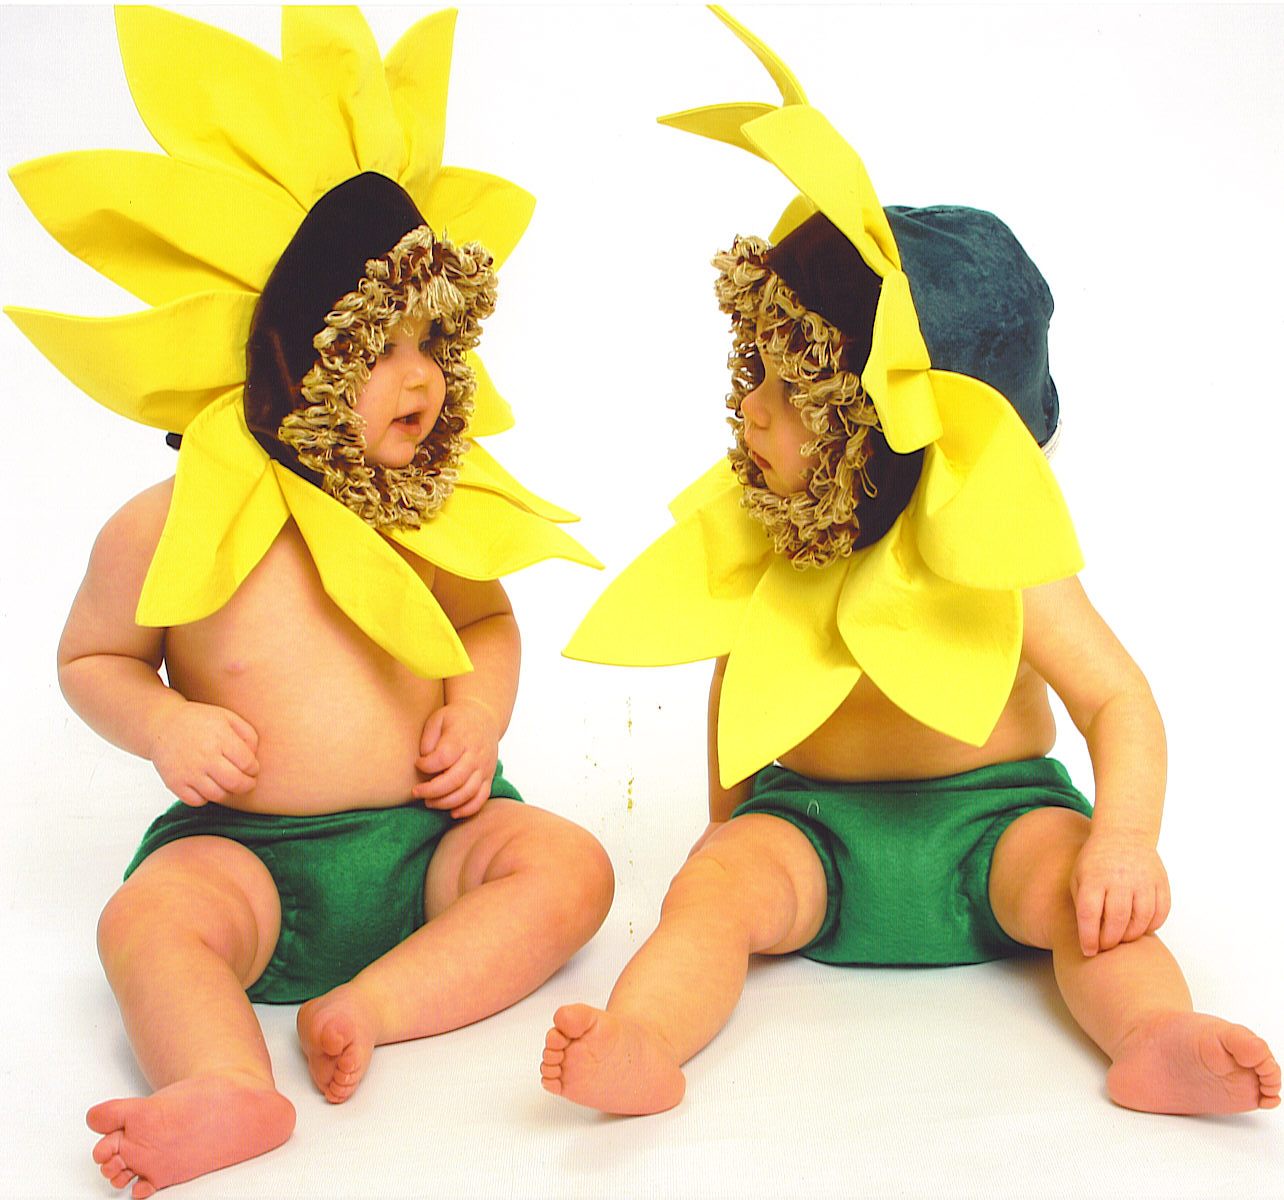 [sunflower+twins+looking+at+each+other2-08.jpg]